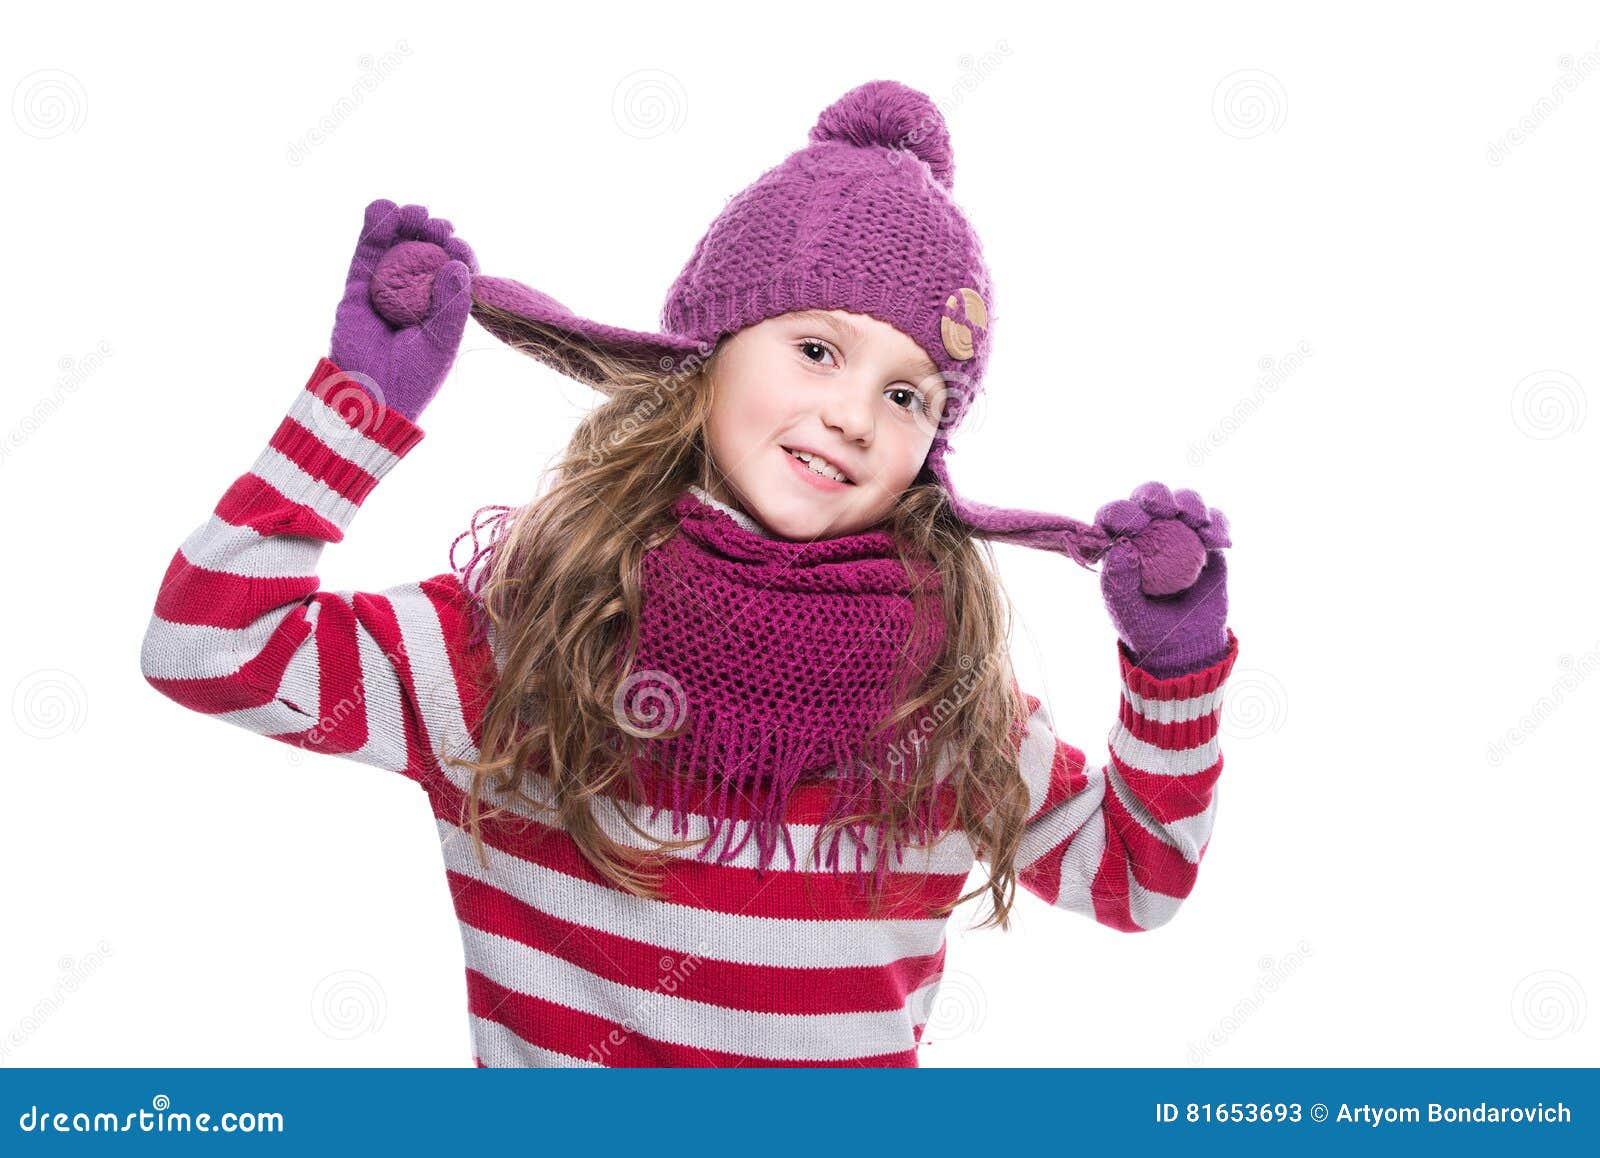 Girls 3 Piece Knit Hat Scarf & Gloves Set in 4 Colors a Winter Accessories for Girls 